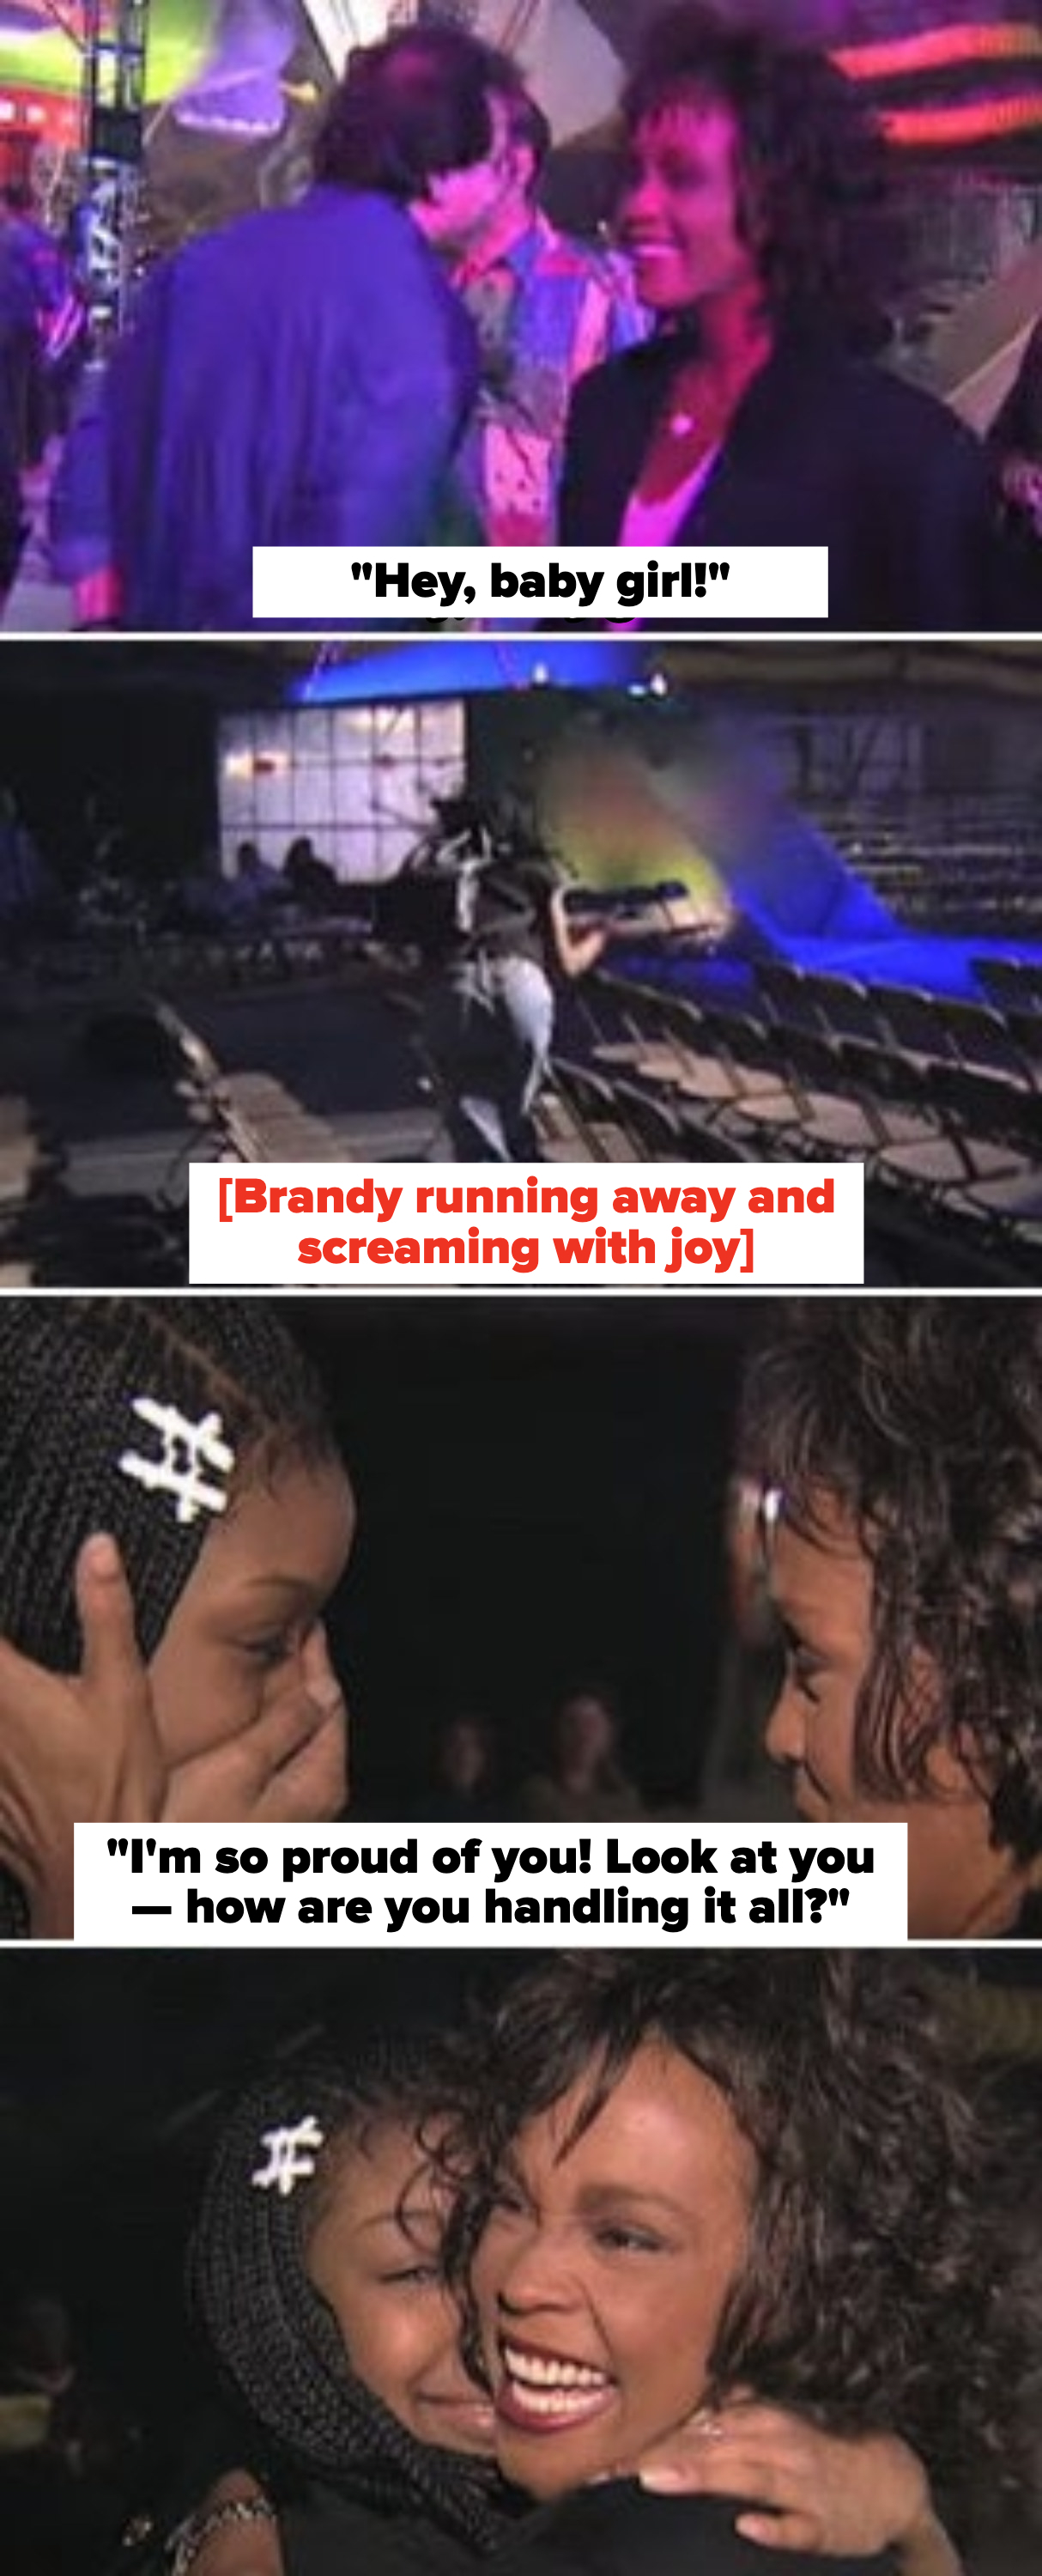 Brandy and Whitney Houston embracing during a tearful first meeting, and Whitney asking Brandy how she&#x27;s handling the first stages of fame